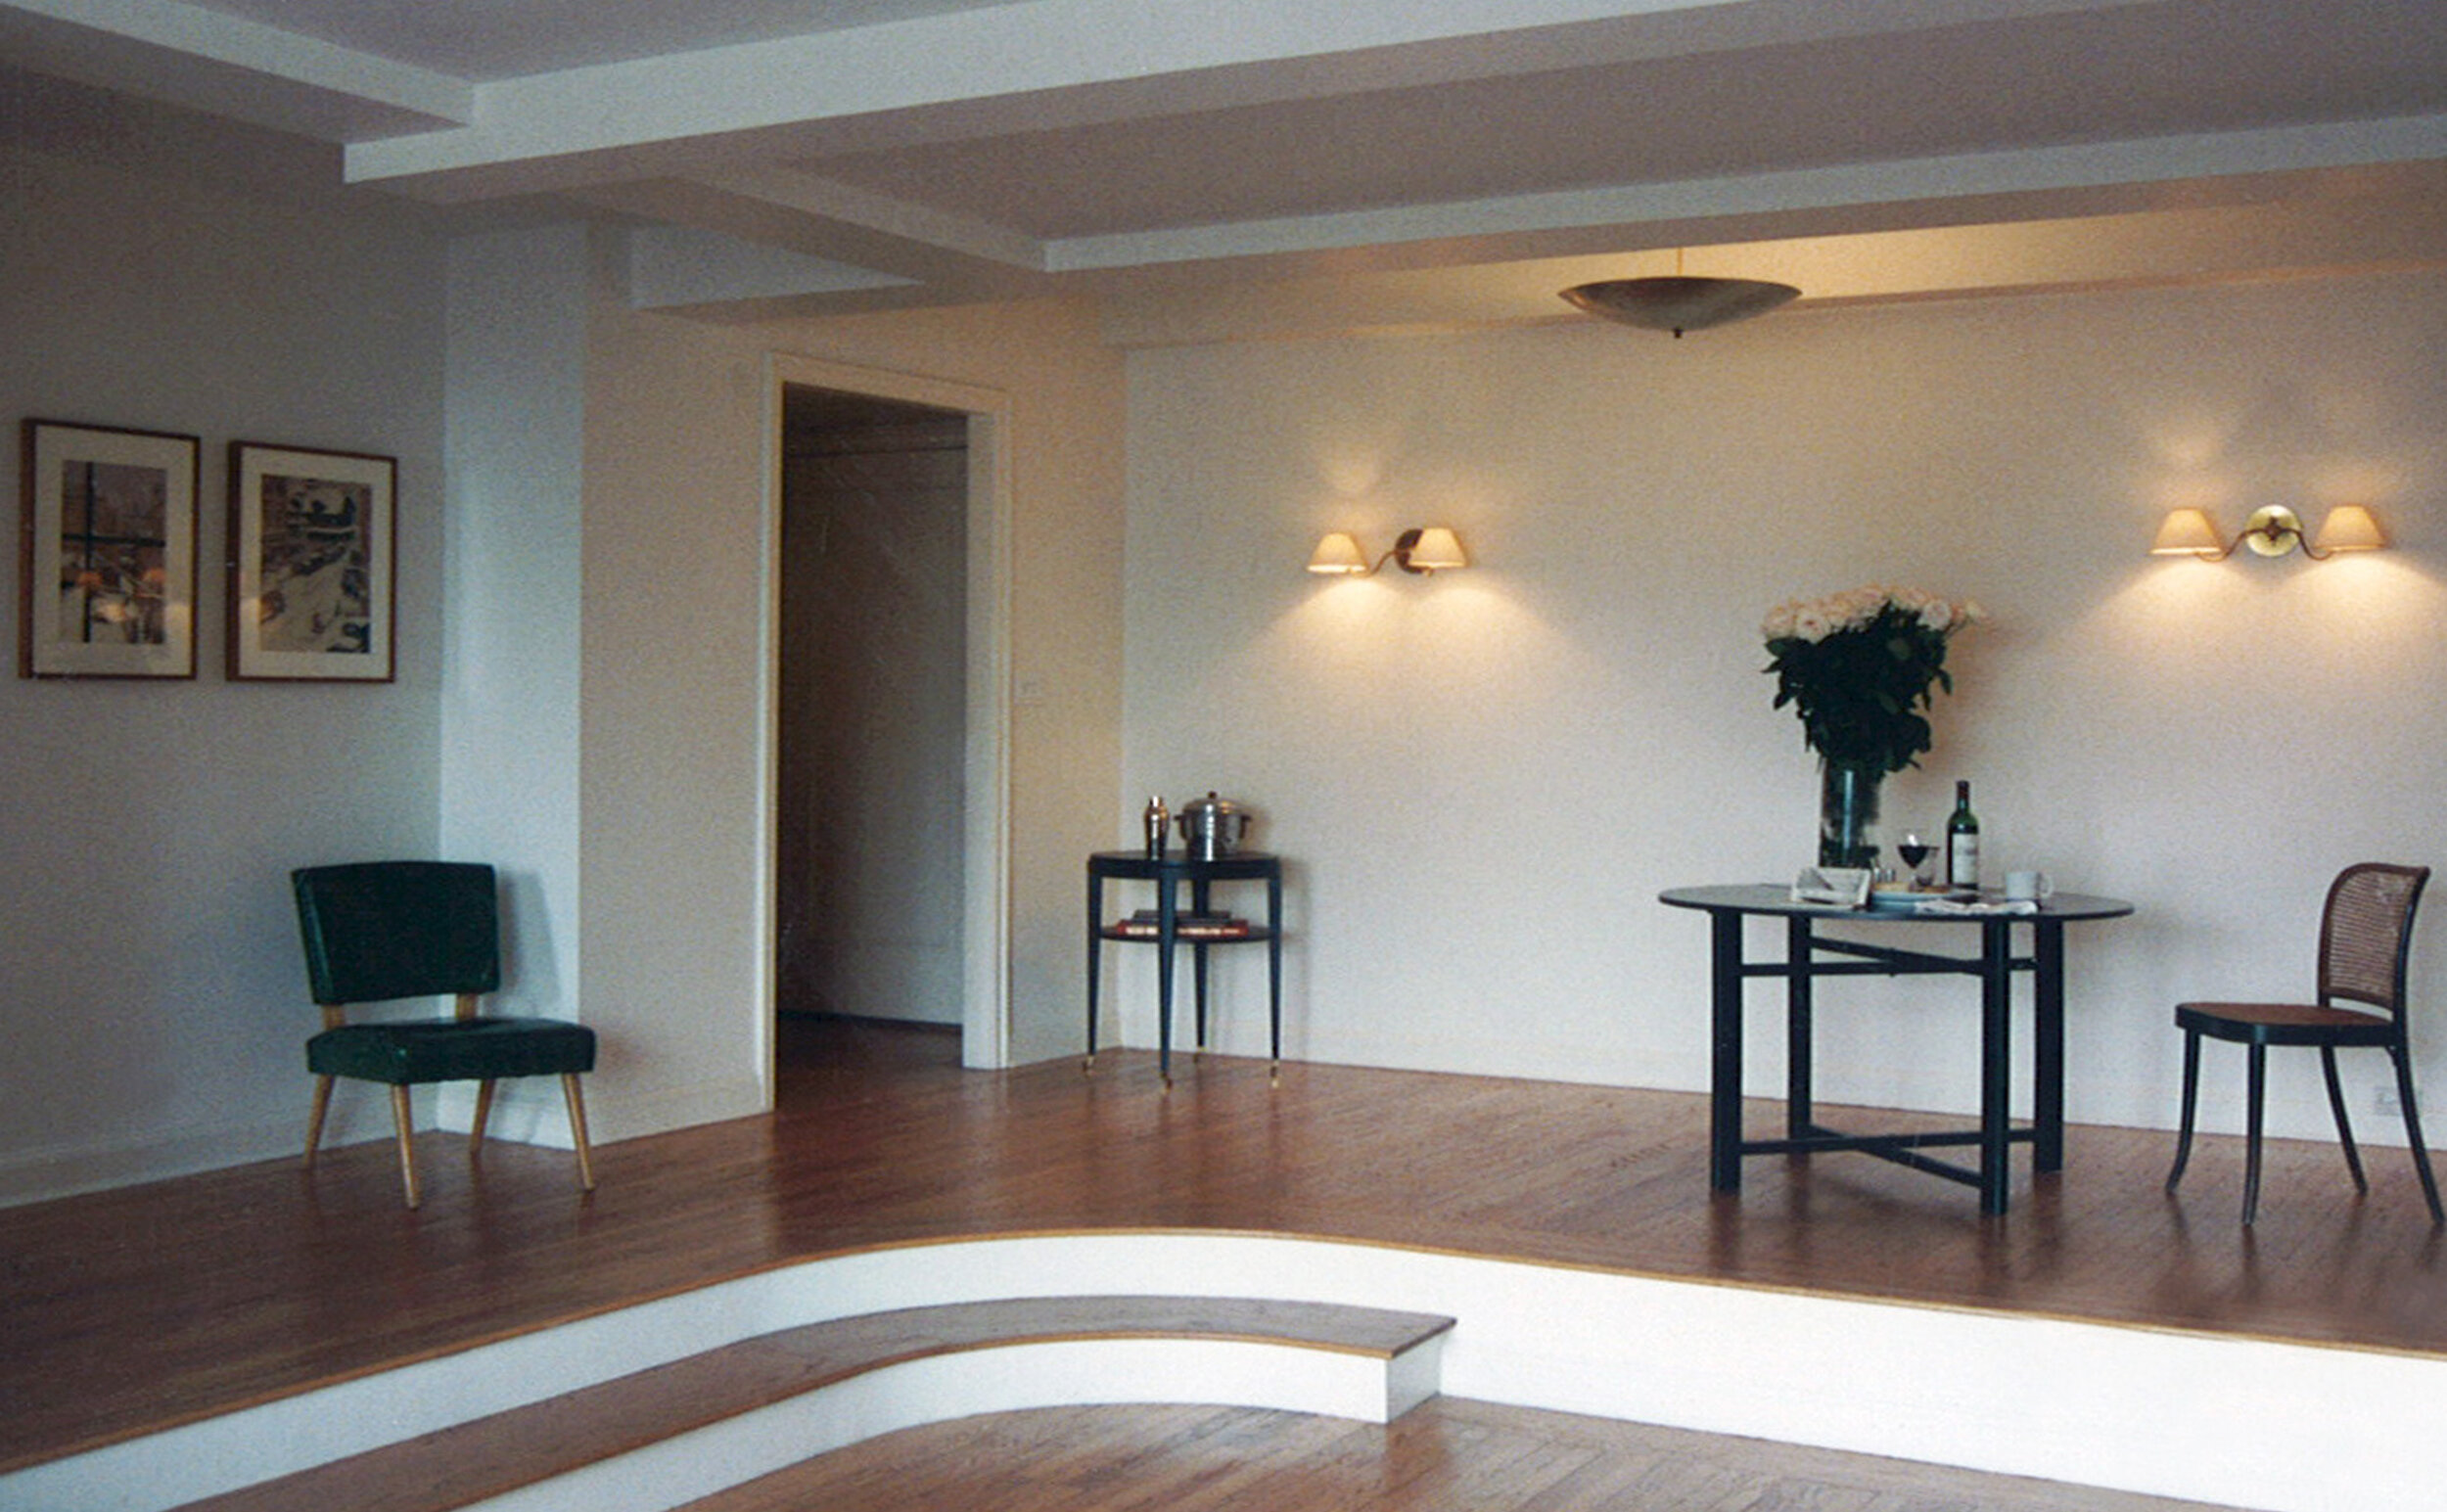 Park ave old dining area.jpg